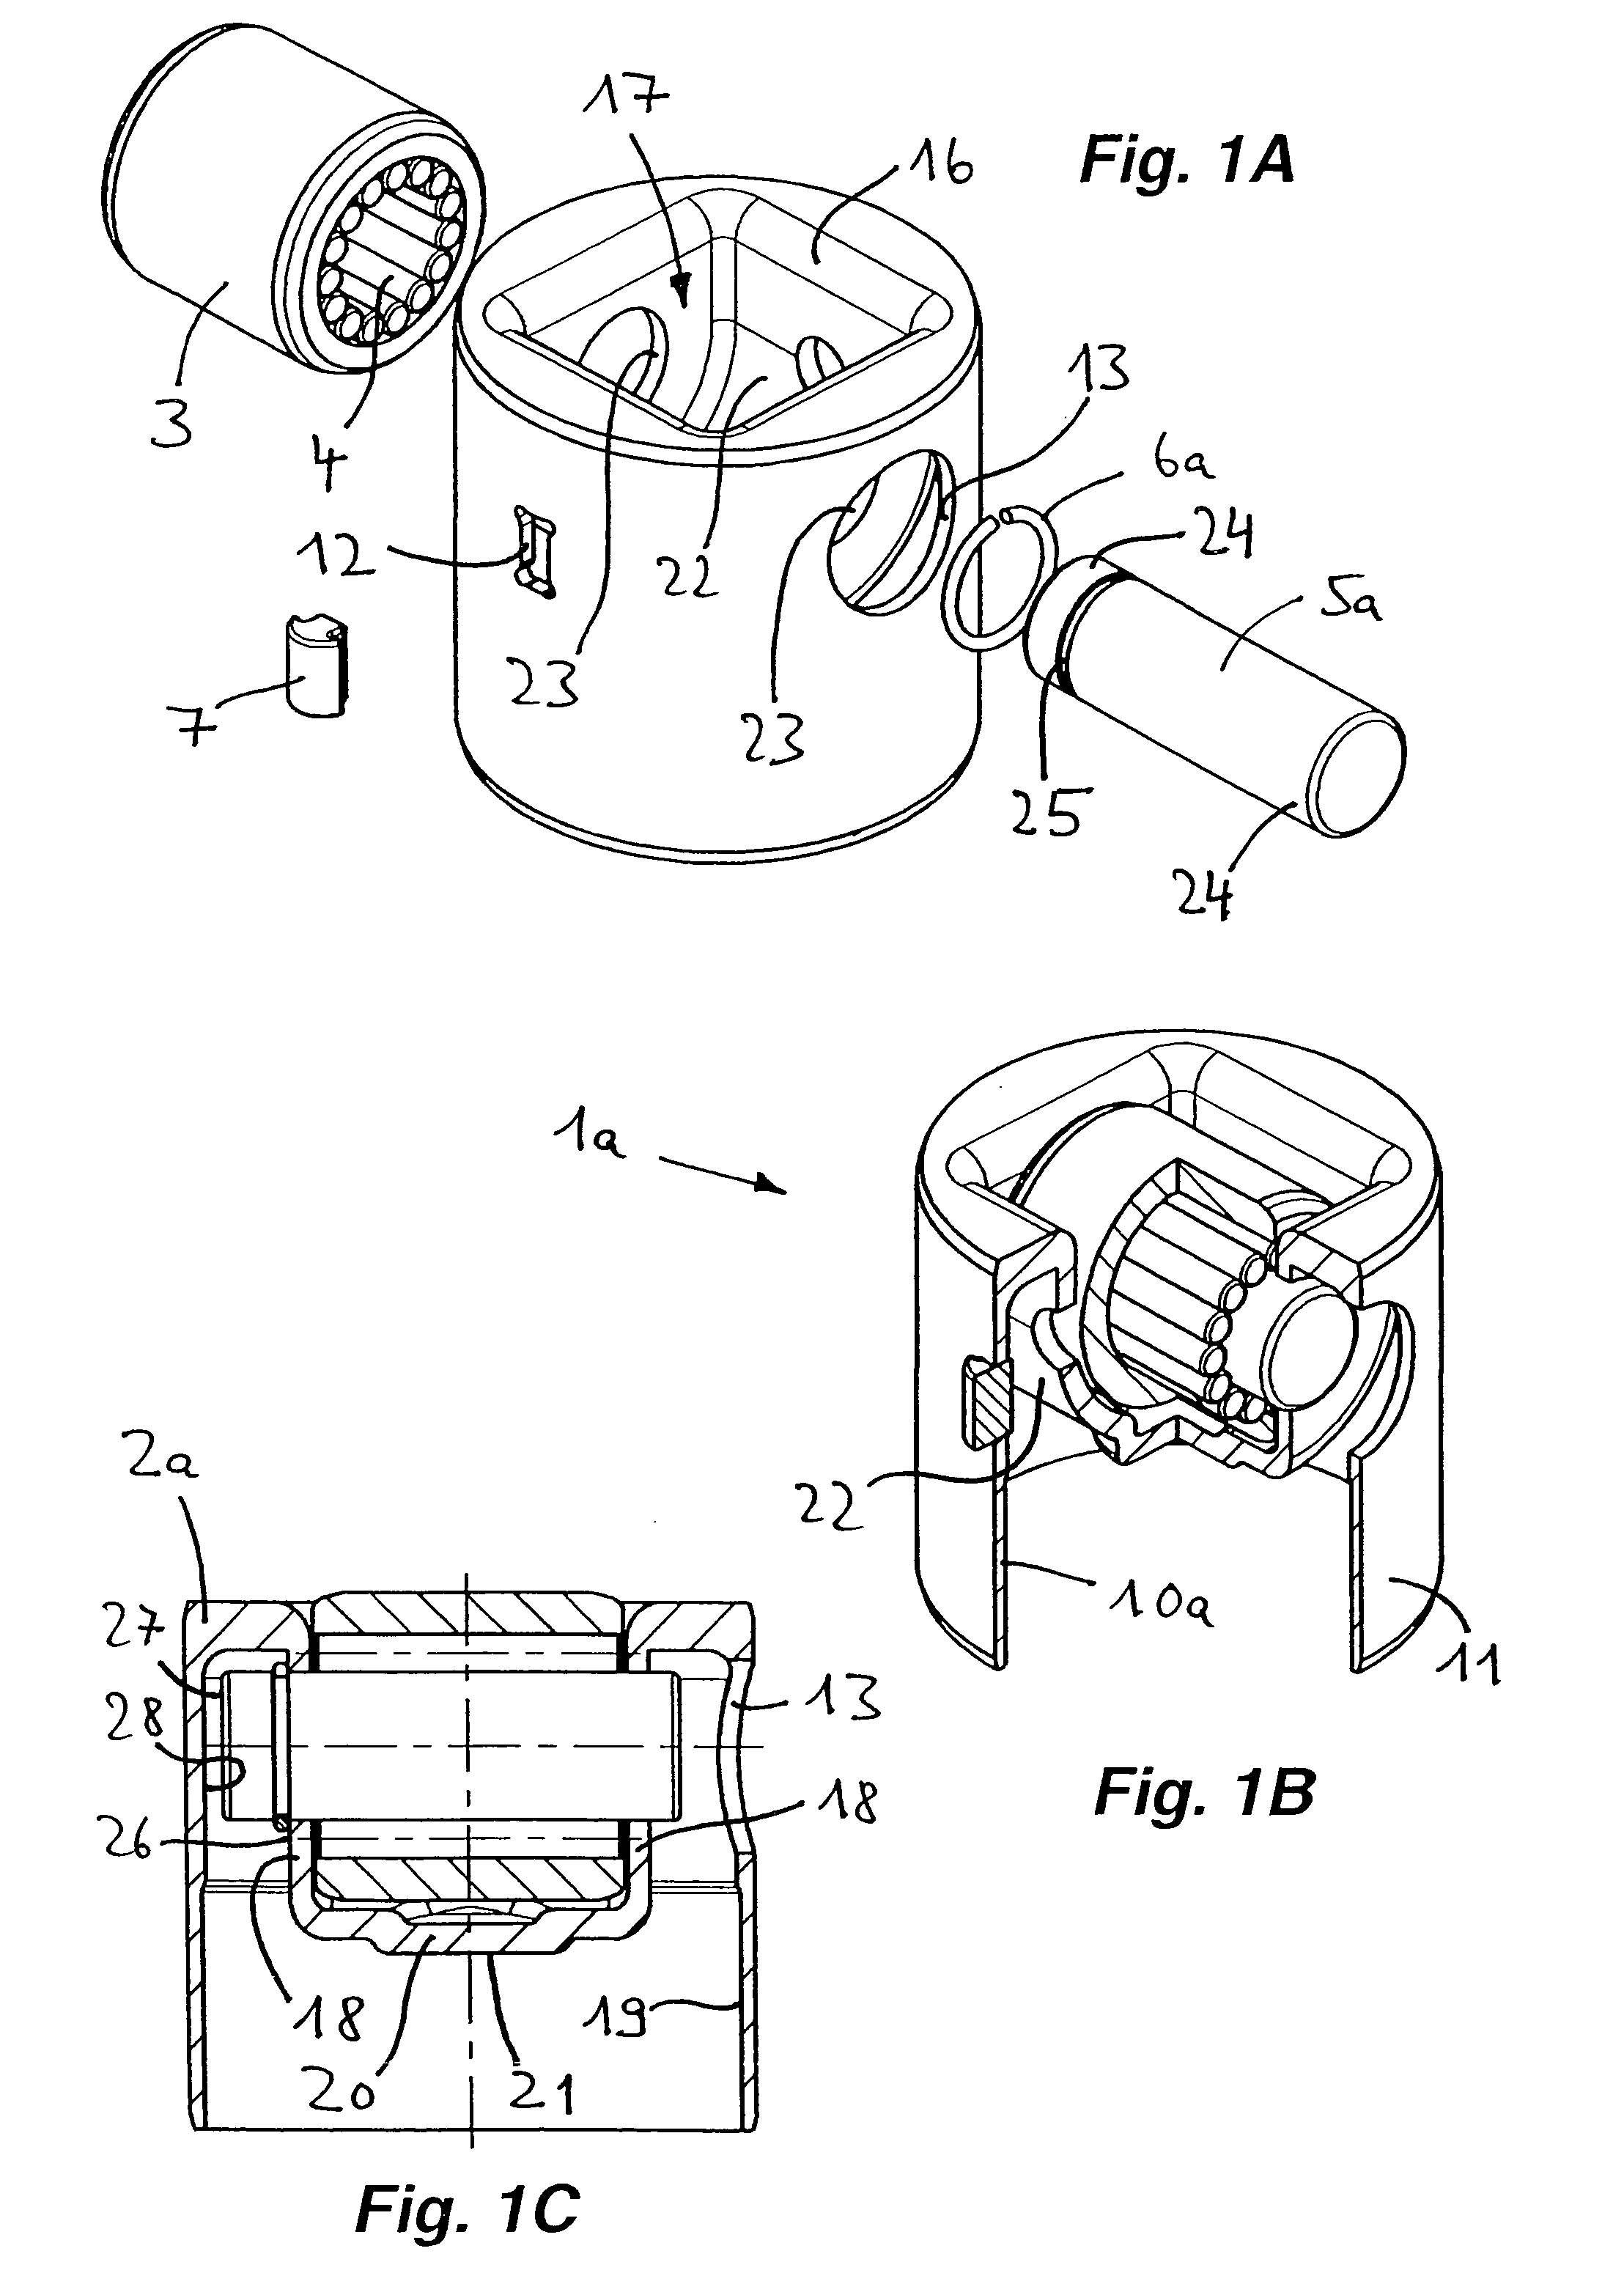 Mechanical roller tappet for an internal combustion engine